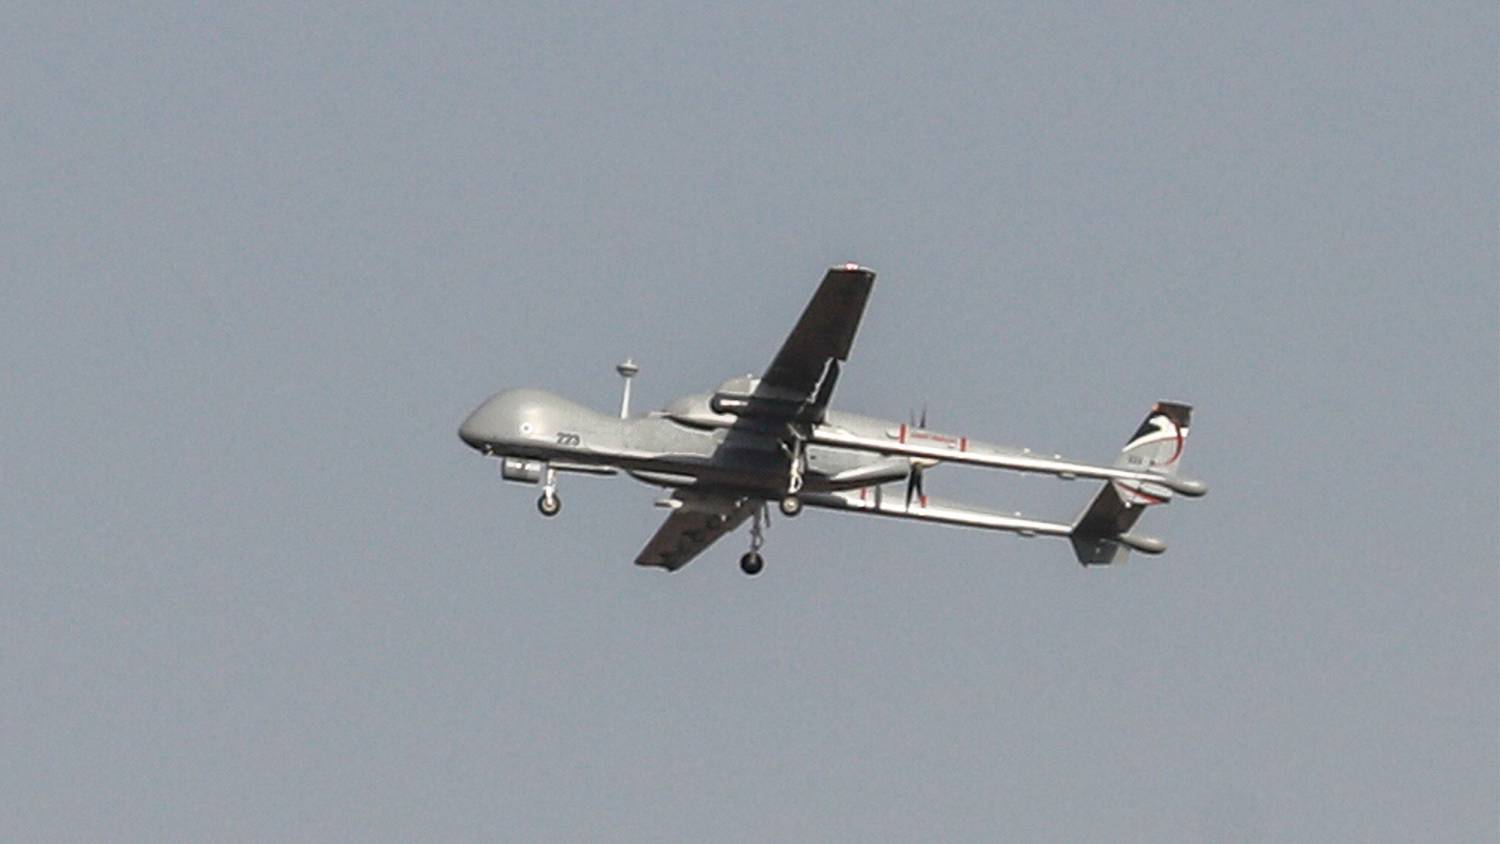 The Heron drone was first tested on innocent Palestinians before being exported to Europe and the US (Ahmad Gharabli/AFP)